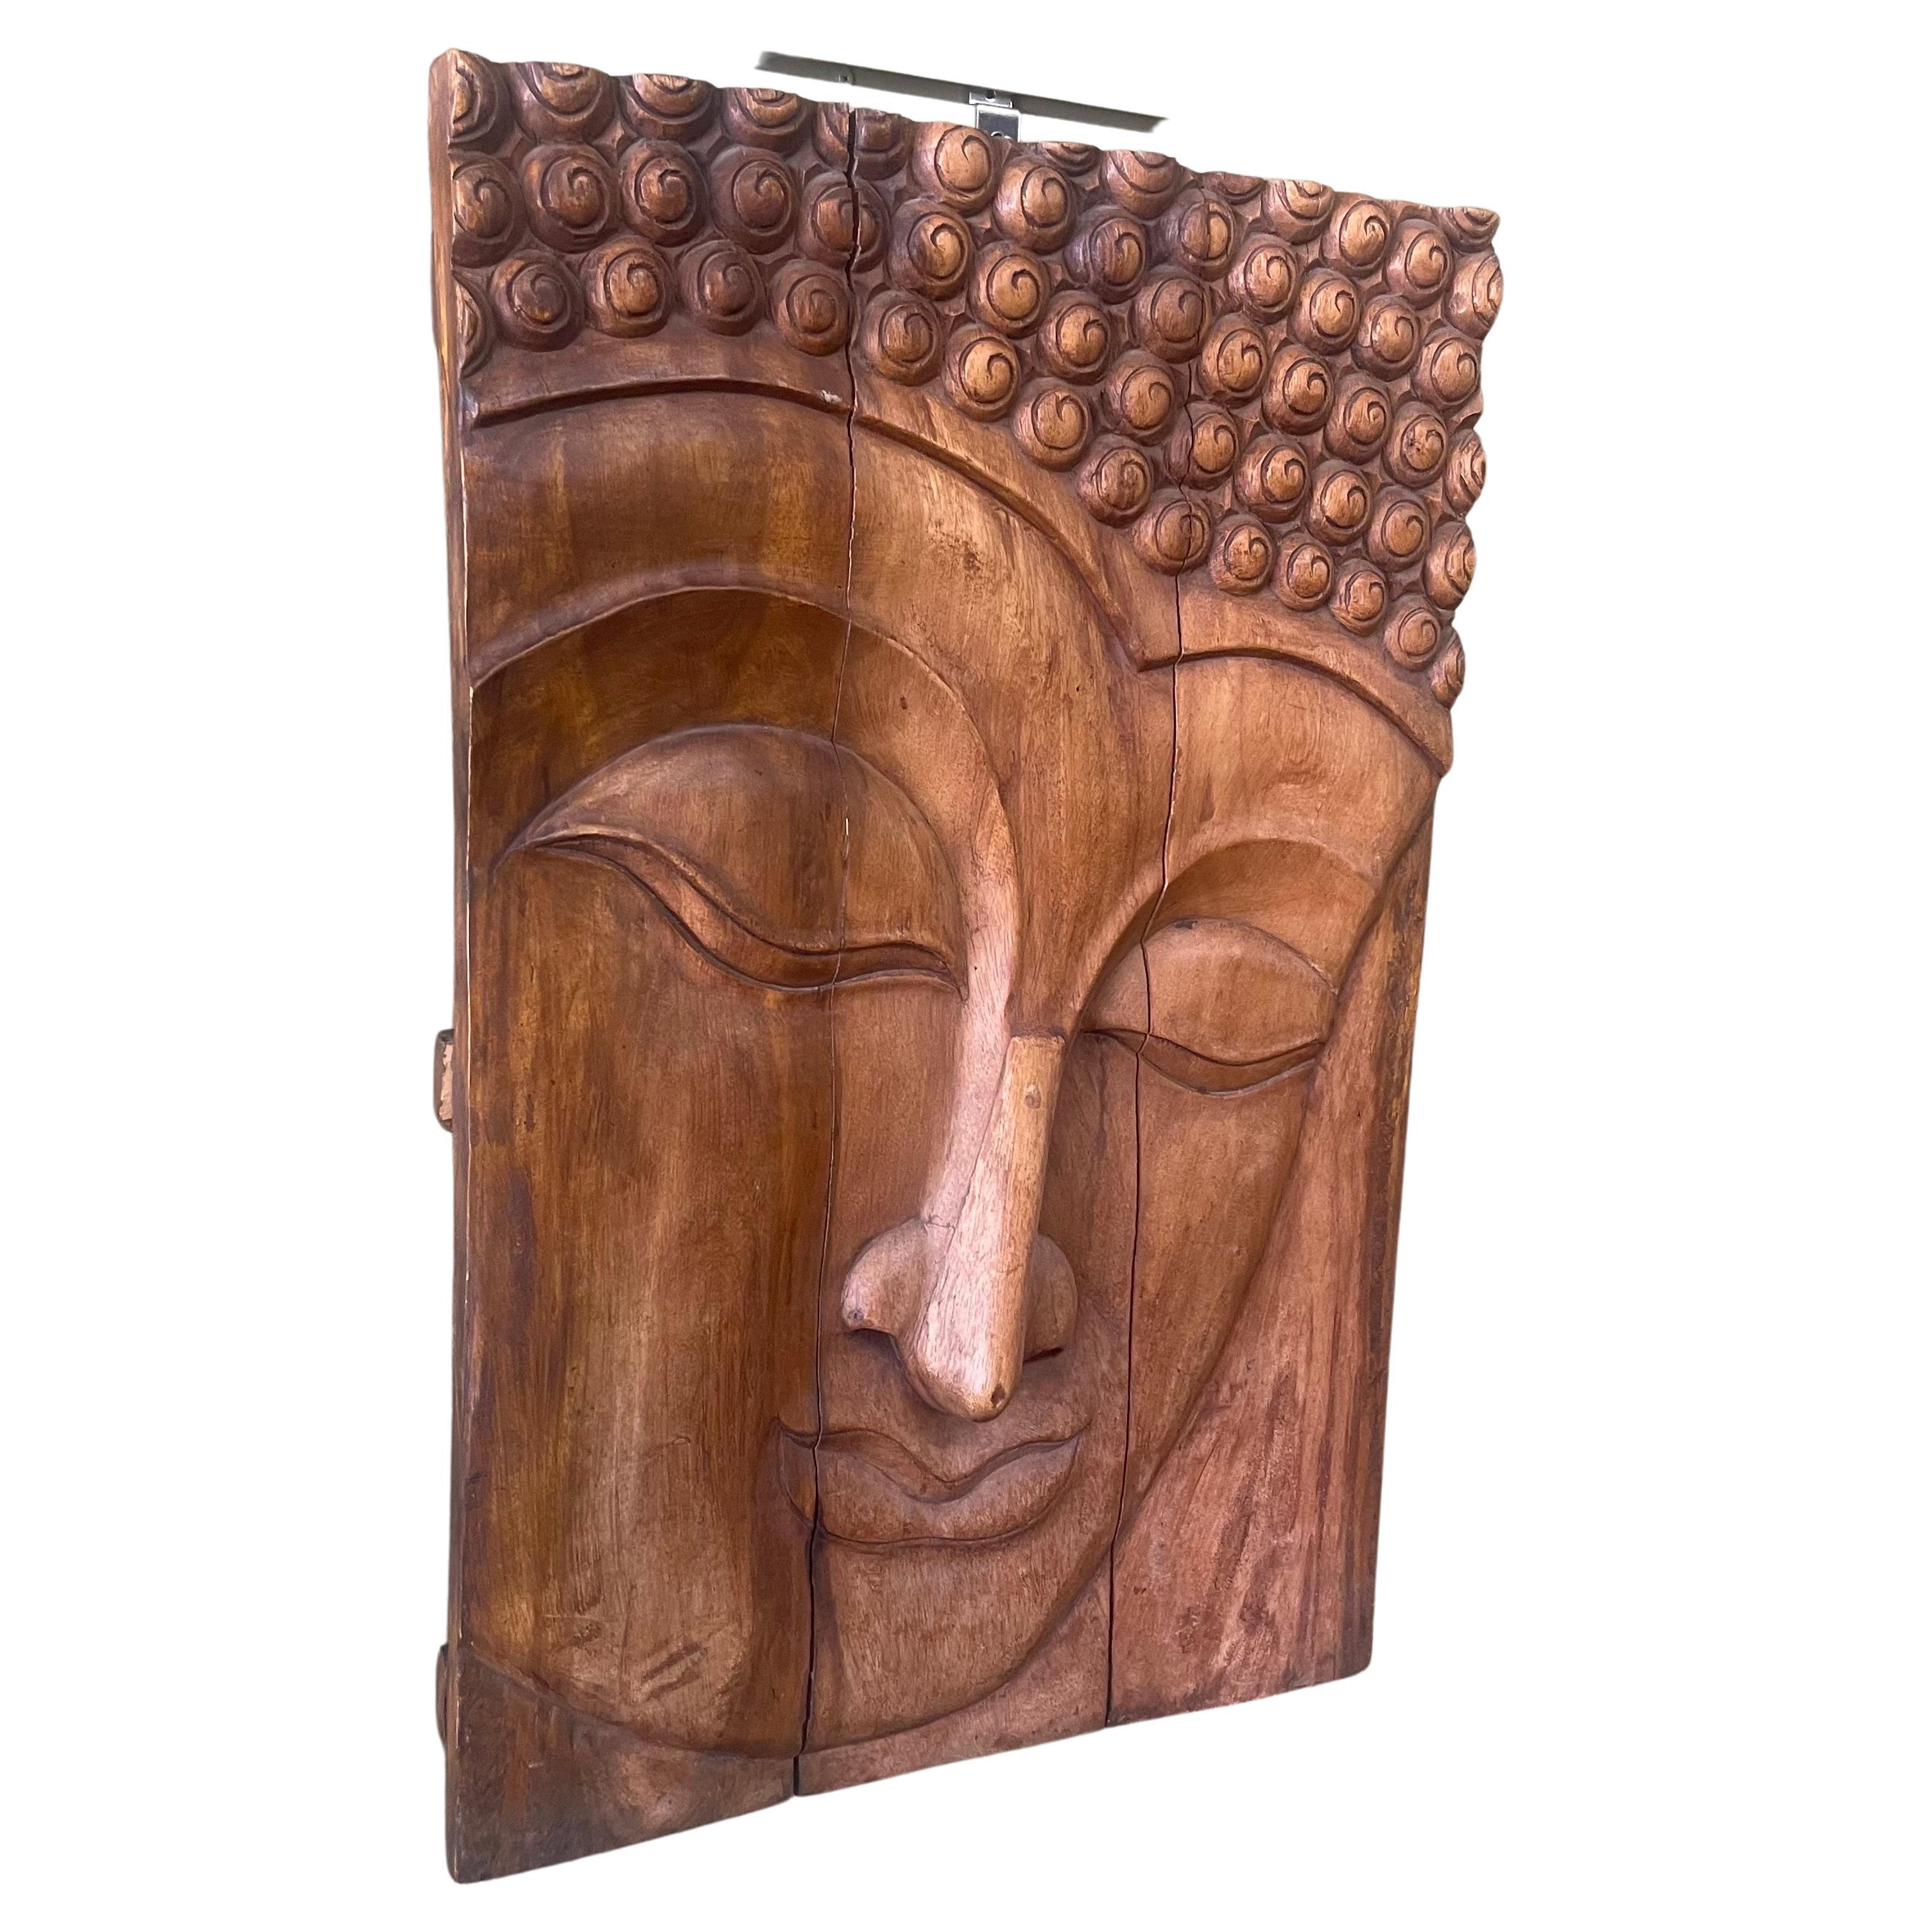 A very cool and impressive hand-carved teak young Buddha wall hanging from Thailand, circa 1980s. The piece is in very good vintage condition and measures 23.5